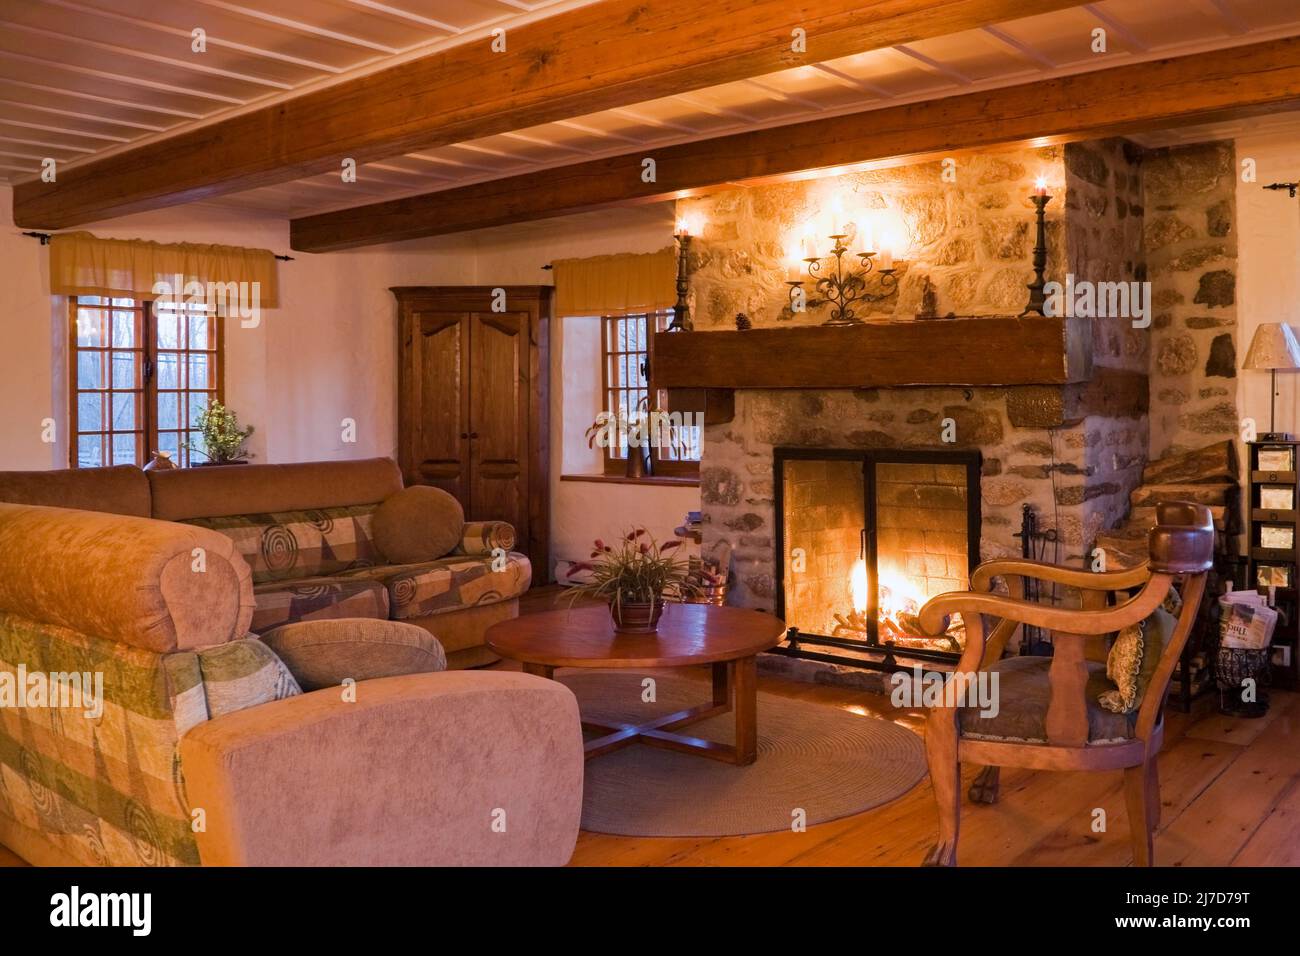 Lit stone fireplace and antique furnishings in living room inside 1800s log home. Stock Photo